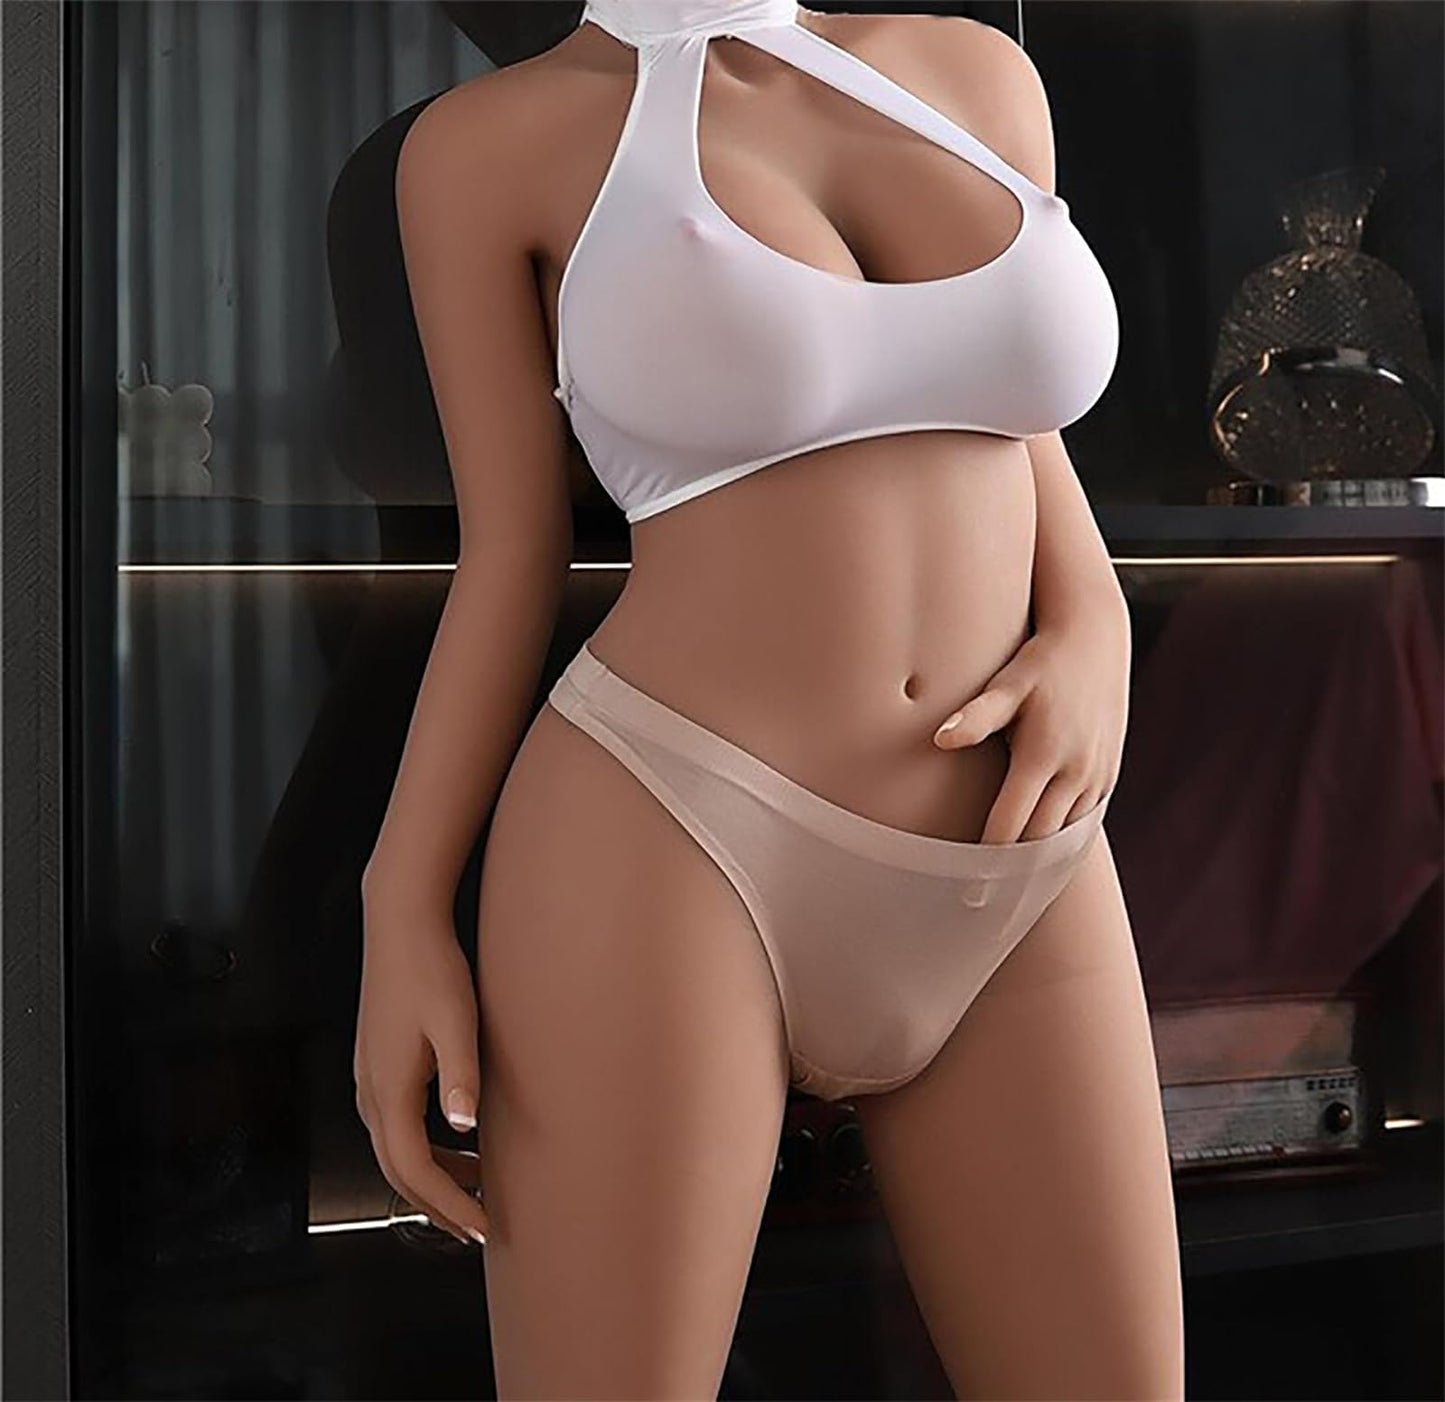 Adult Full-Size Female Torso Silicone Doll Full Body Sex Doll Love Doll Material Feels Like Real Female Skin, 36D Jelly Breasts, Built-in Metal Skeleton can Change Positions at Will (64in/88lb)